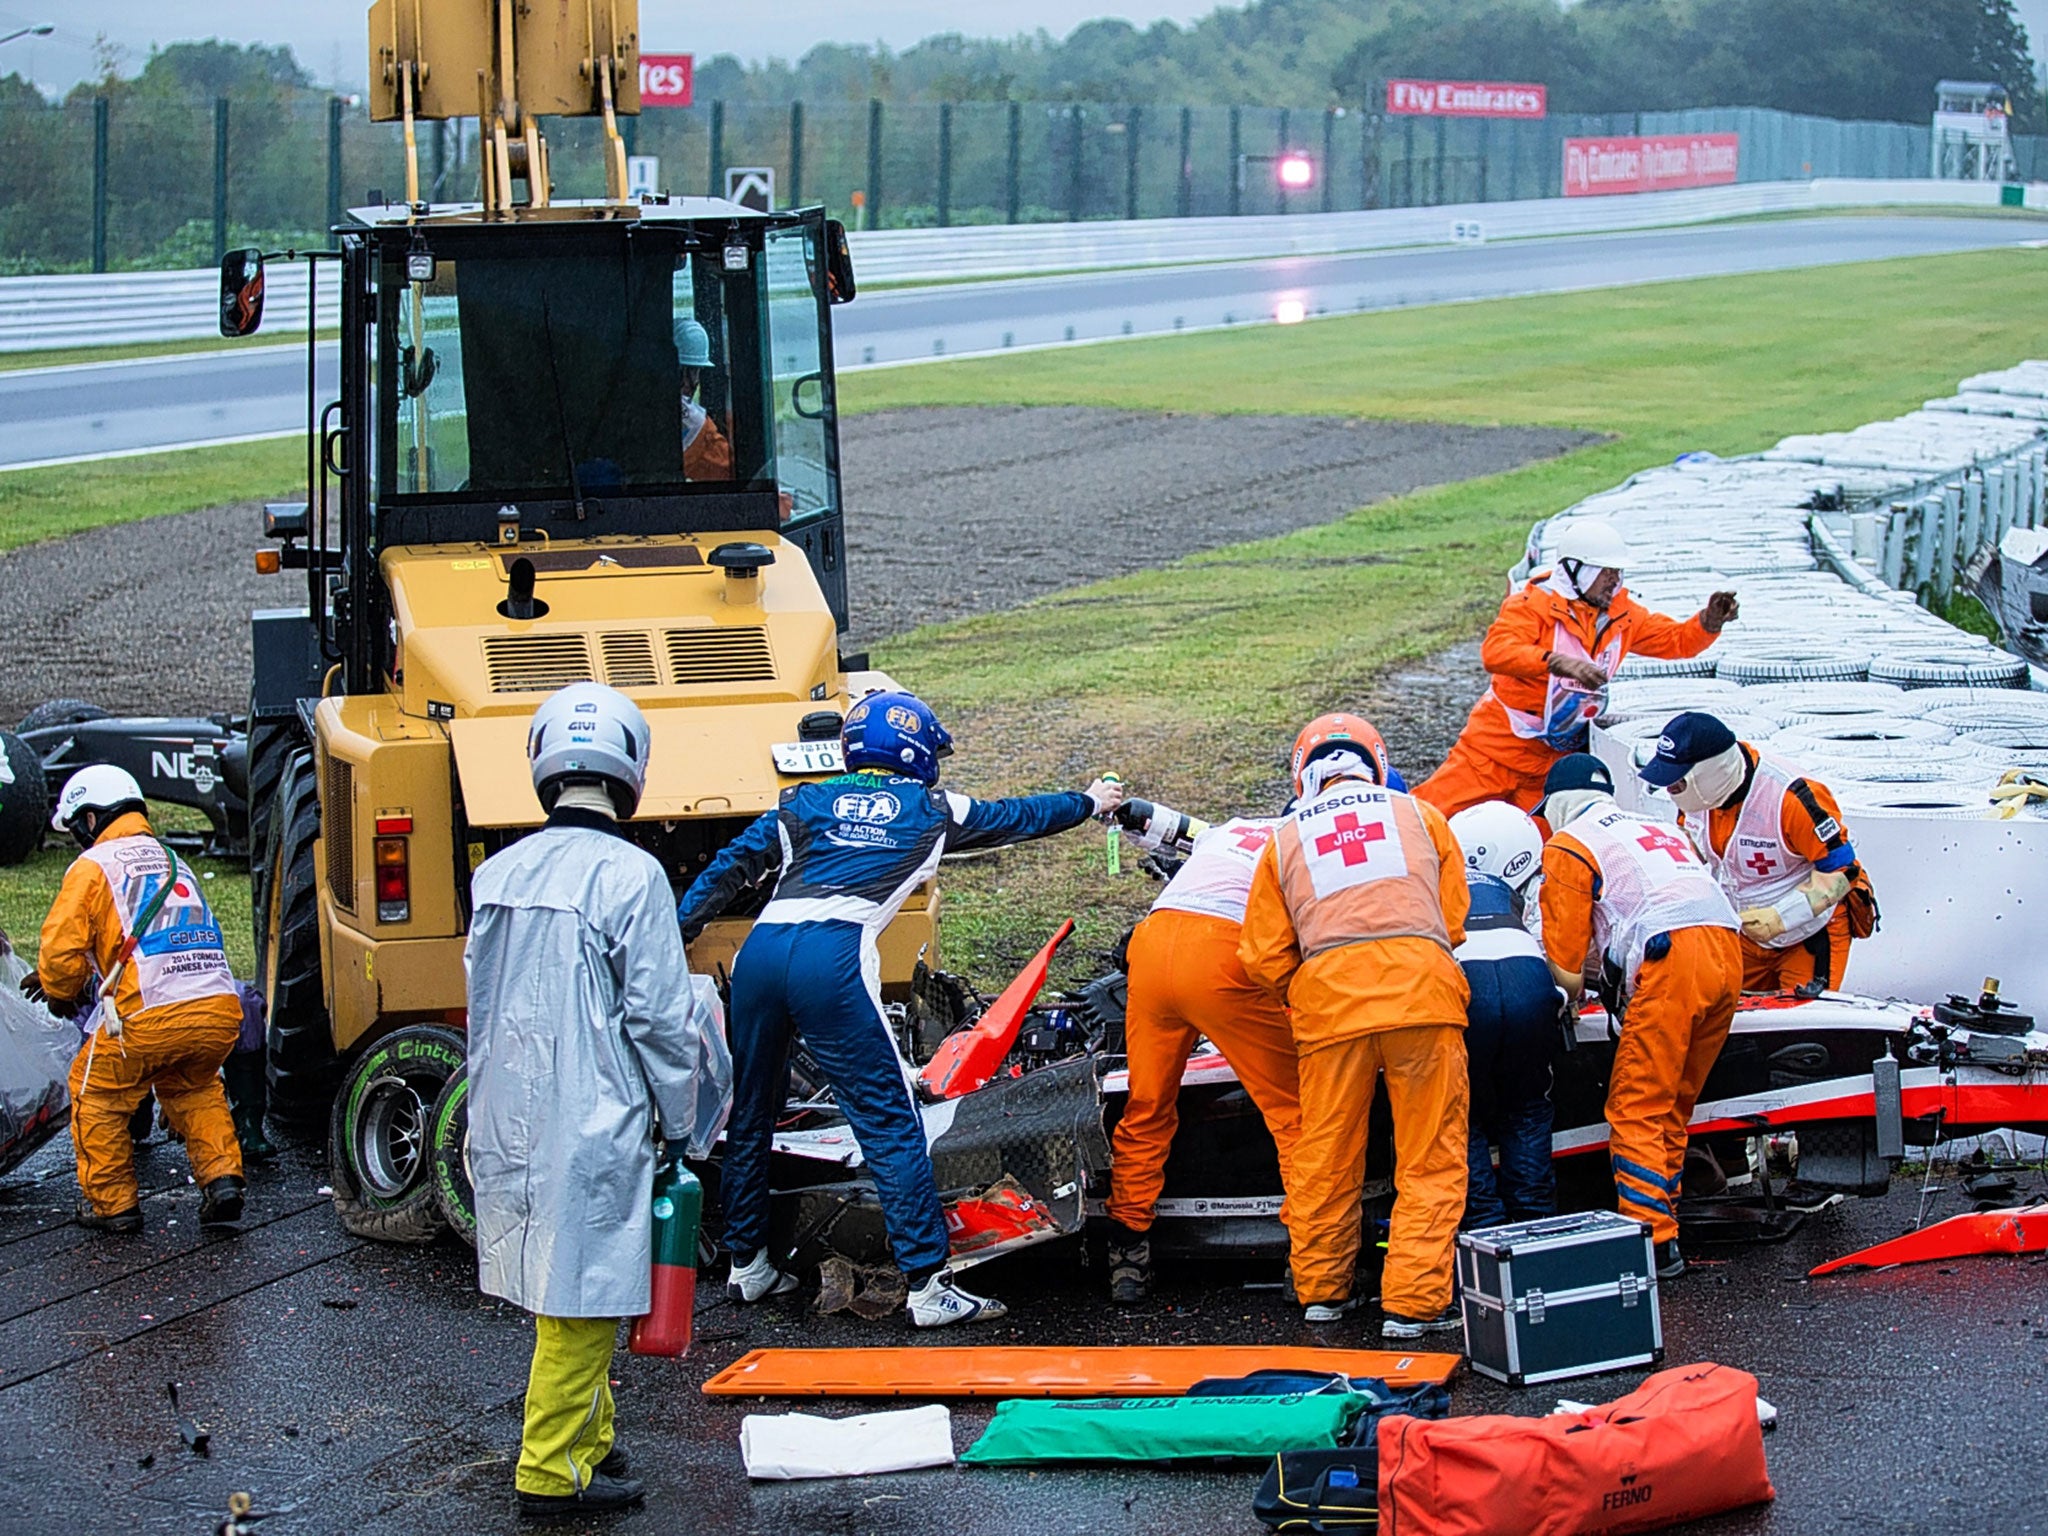 Jules Bianchi receiving treatment after smashing into the tractor (in background) that had been attending to Sauber driver Adrian Sutil’s earlier crash